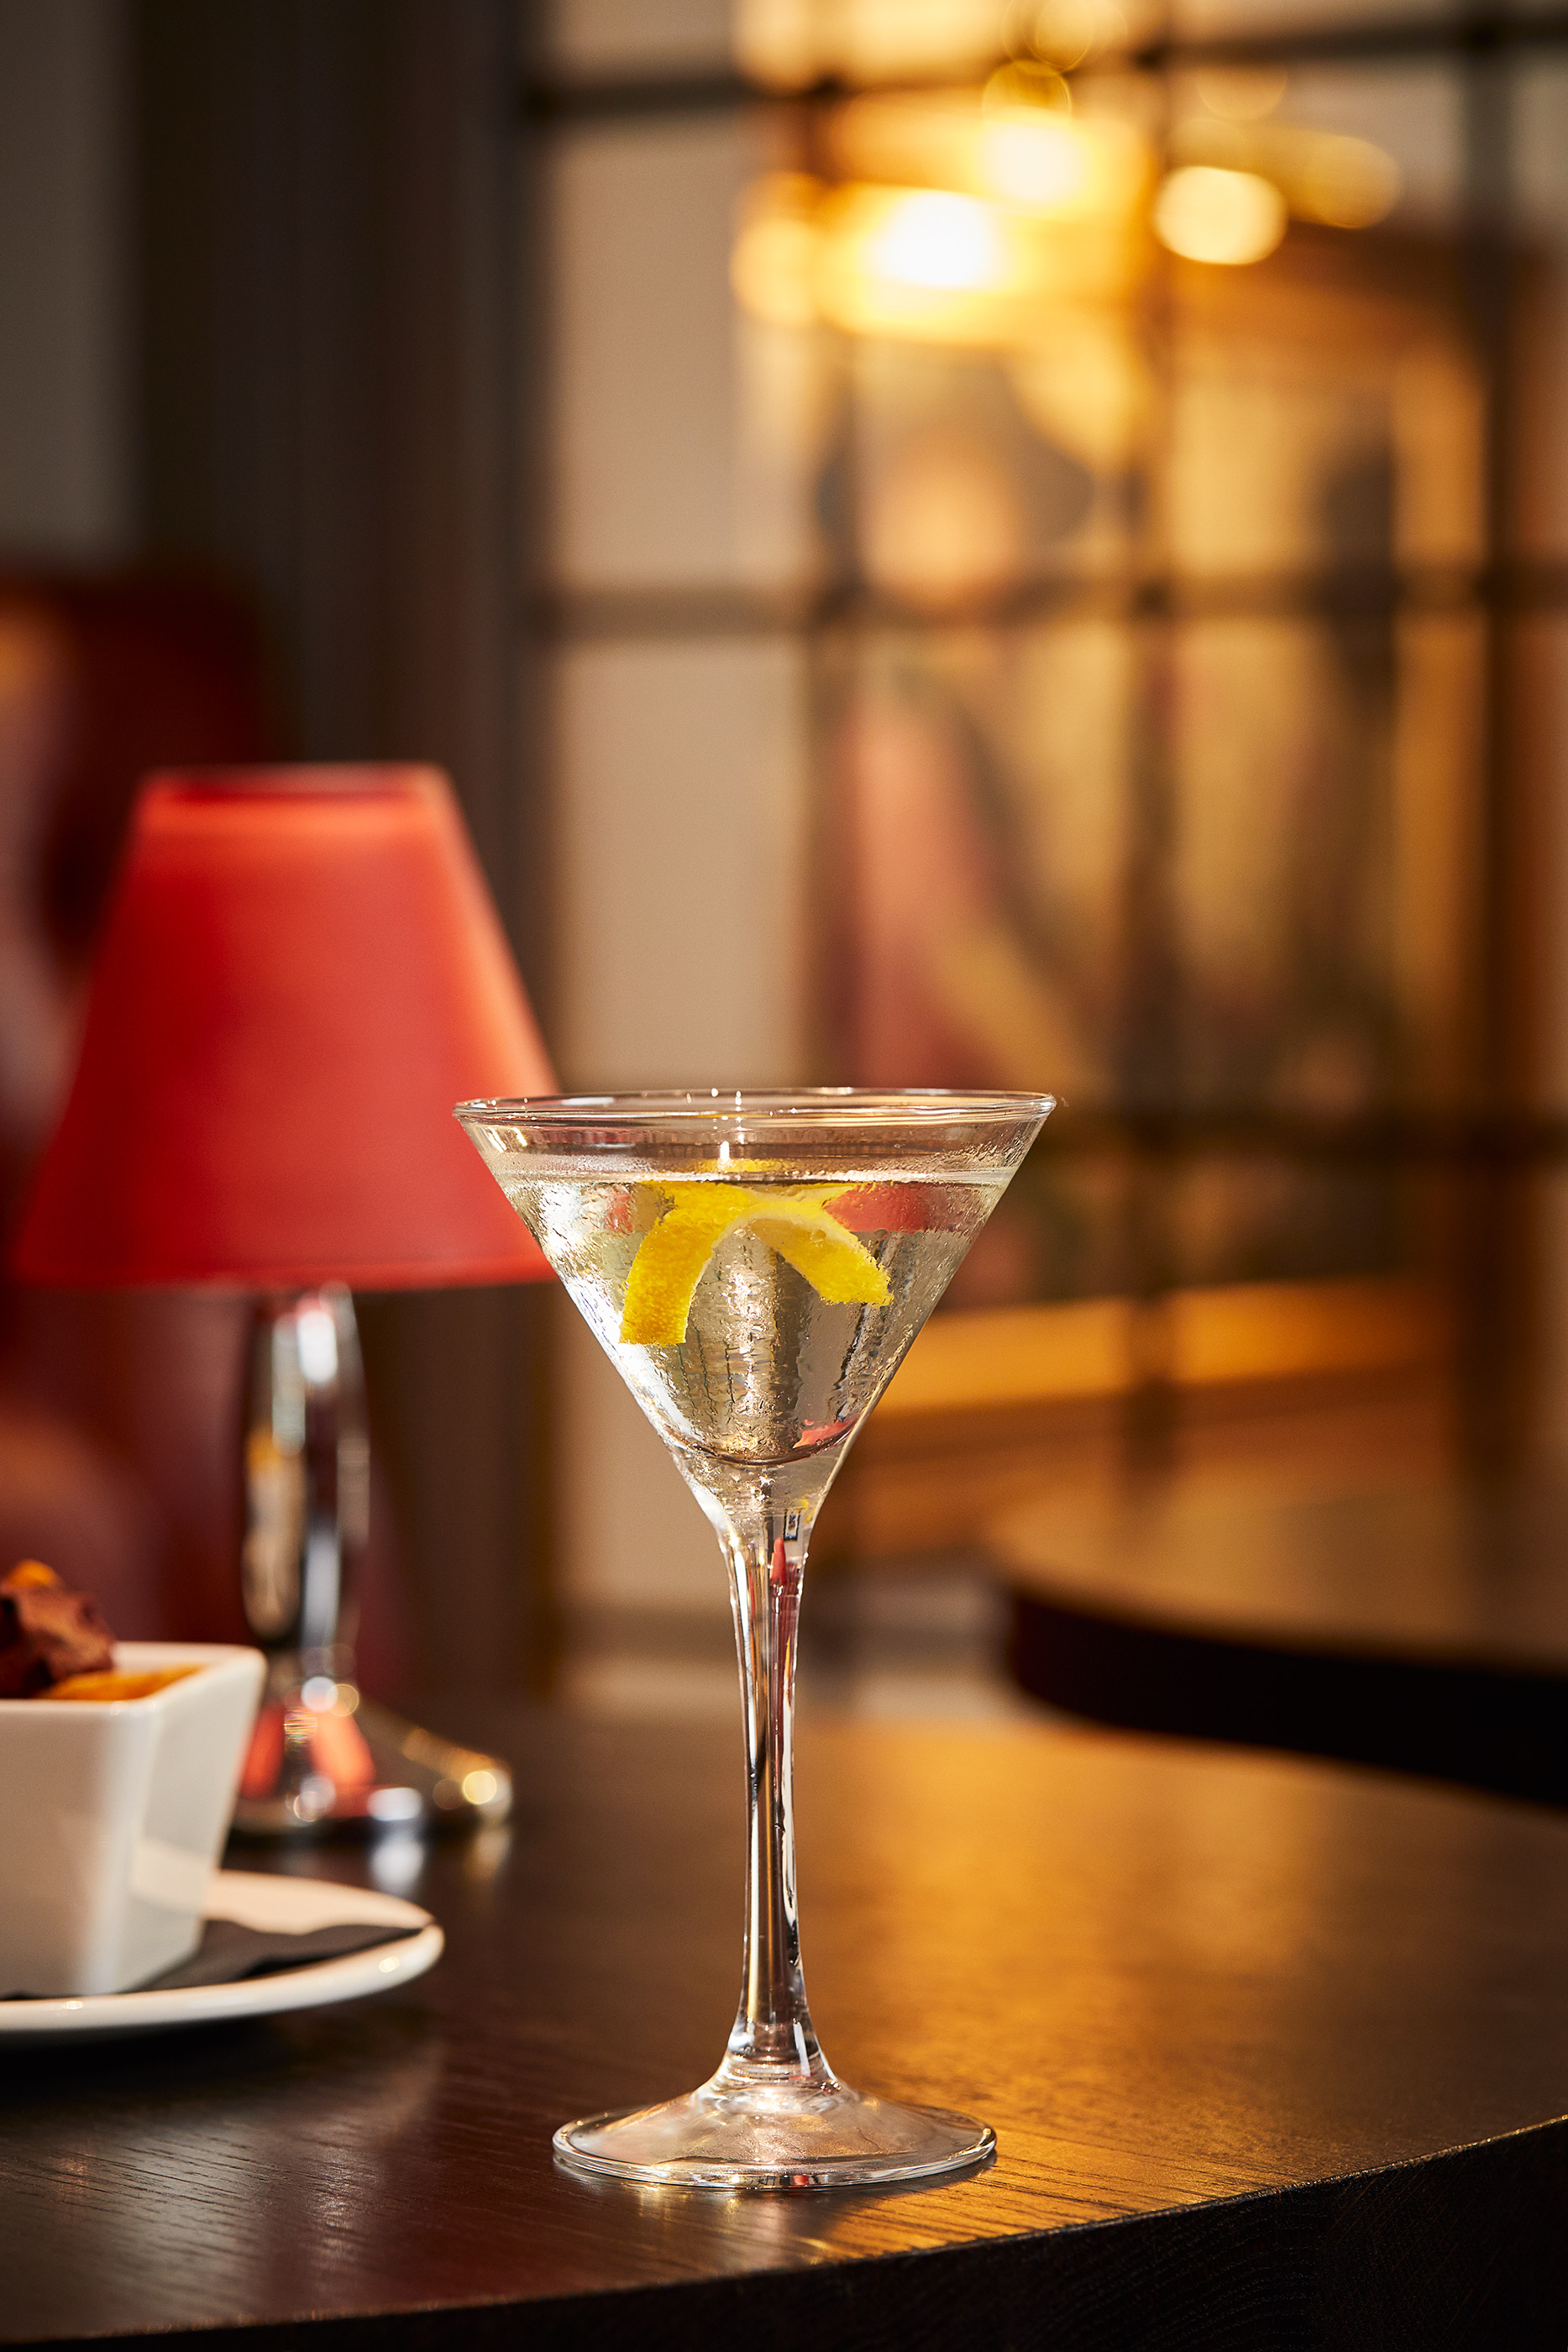 Martini at The Berystede Hotel,  Ascot, Alastair Ferrier, Edinburgh based food, drink and hospitality photographer.